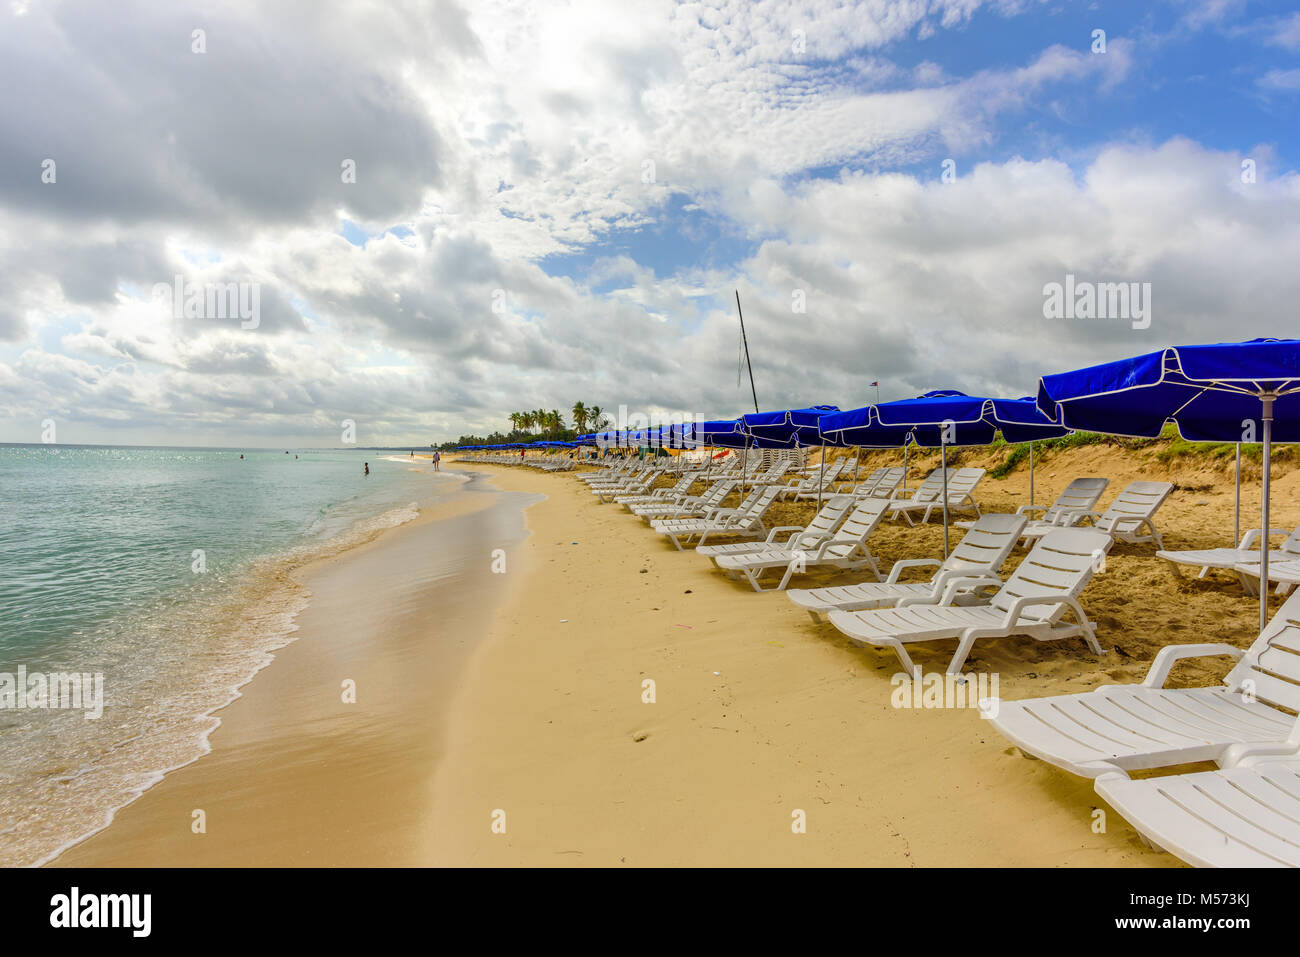 white chaise lounges and blue umbrellas stand on a beach in the sand near the ocean with green waves and a blue sky with white clouds Stock Photo